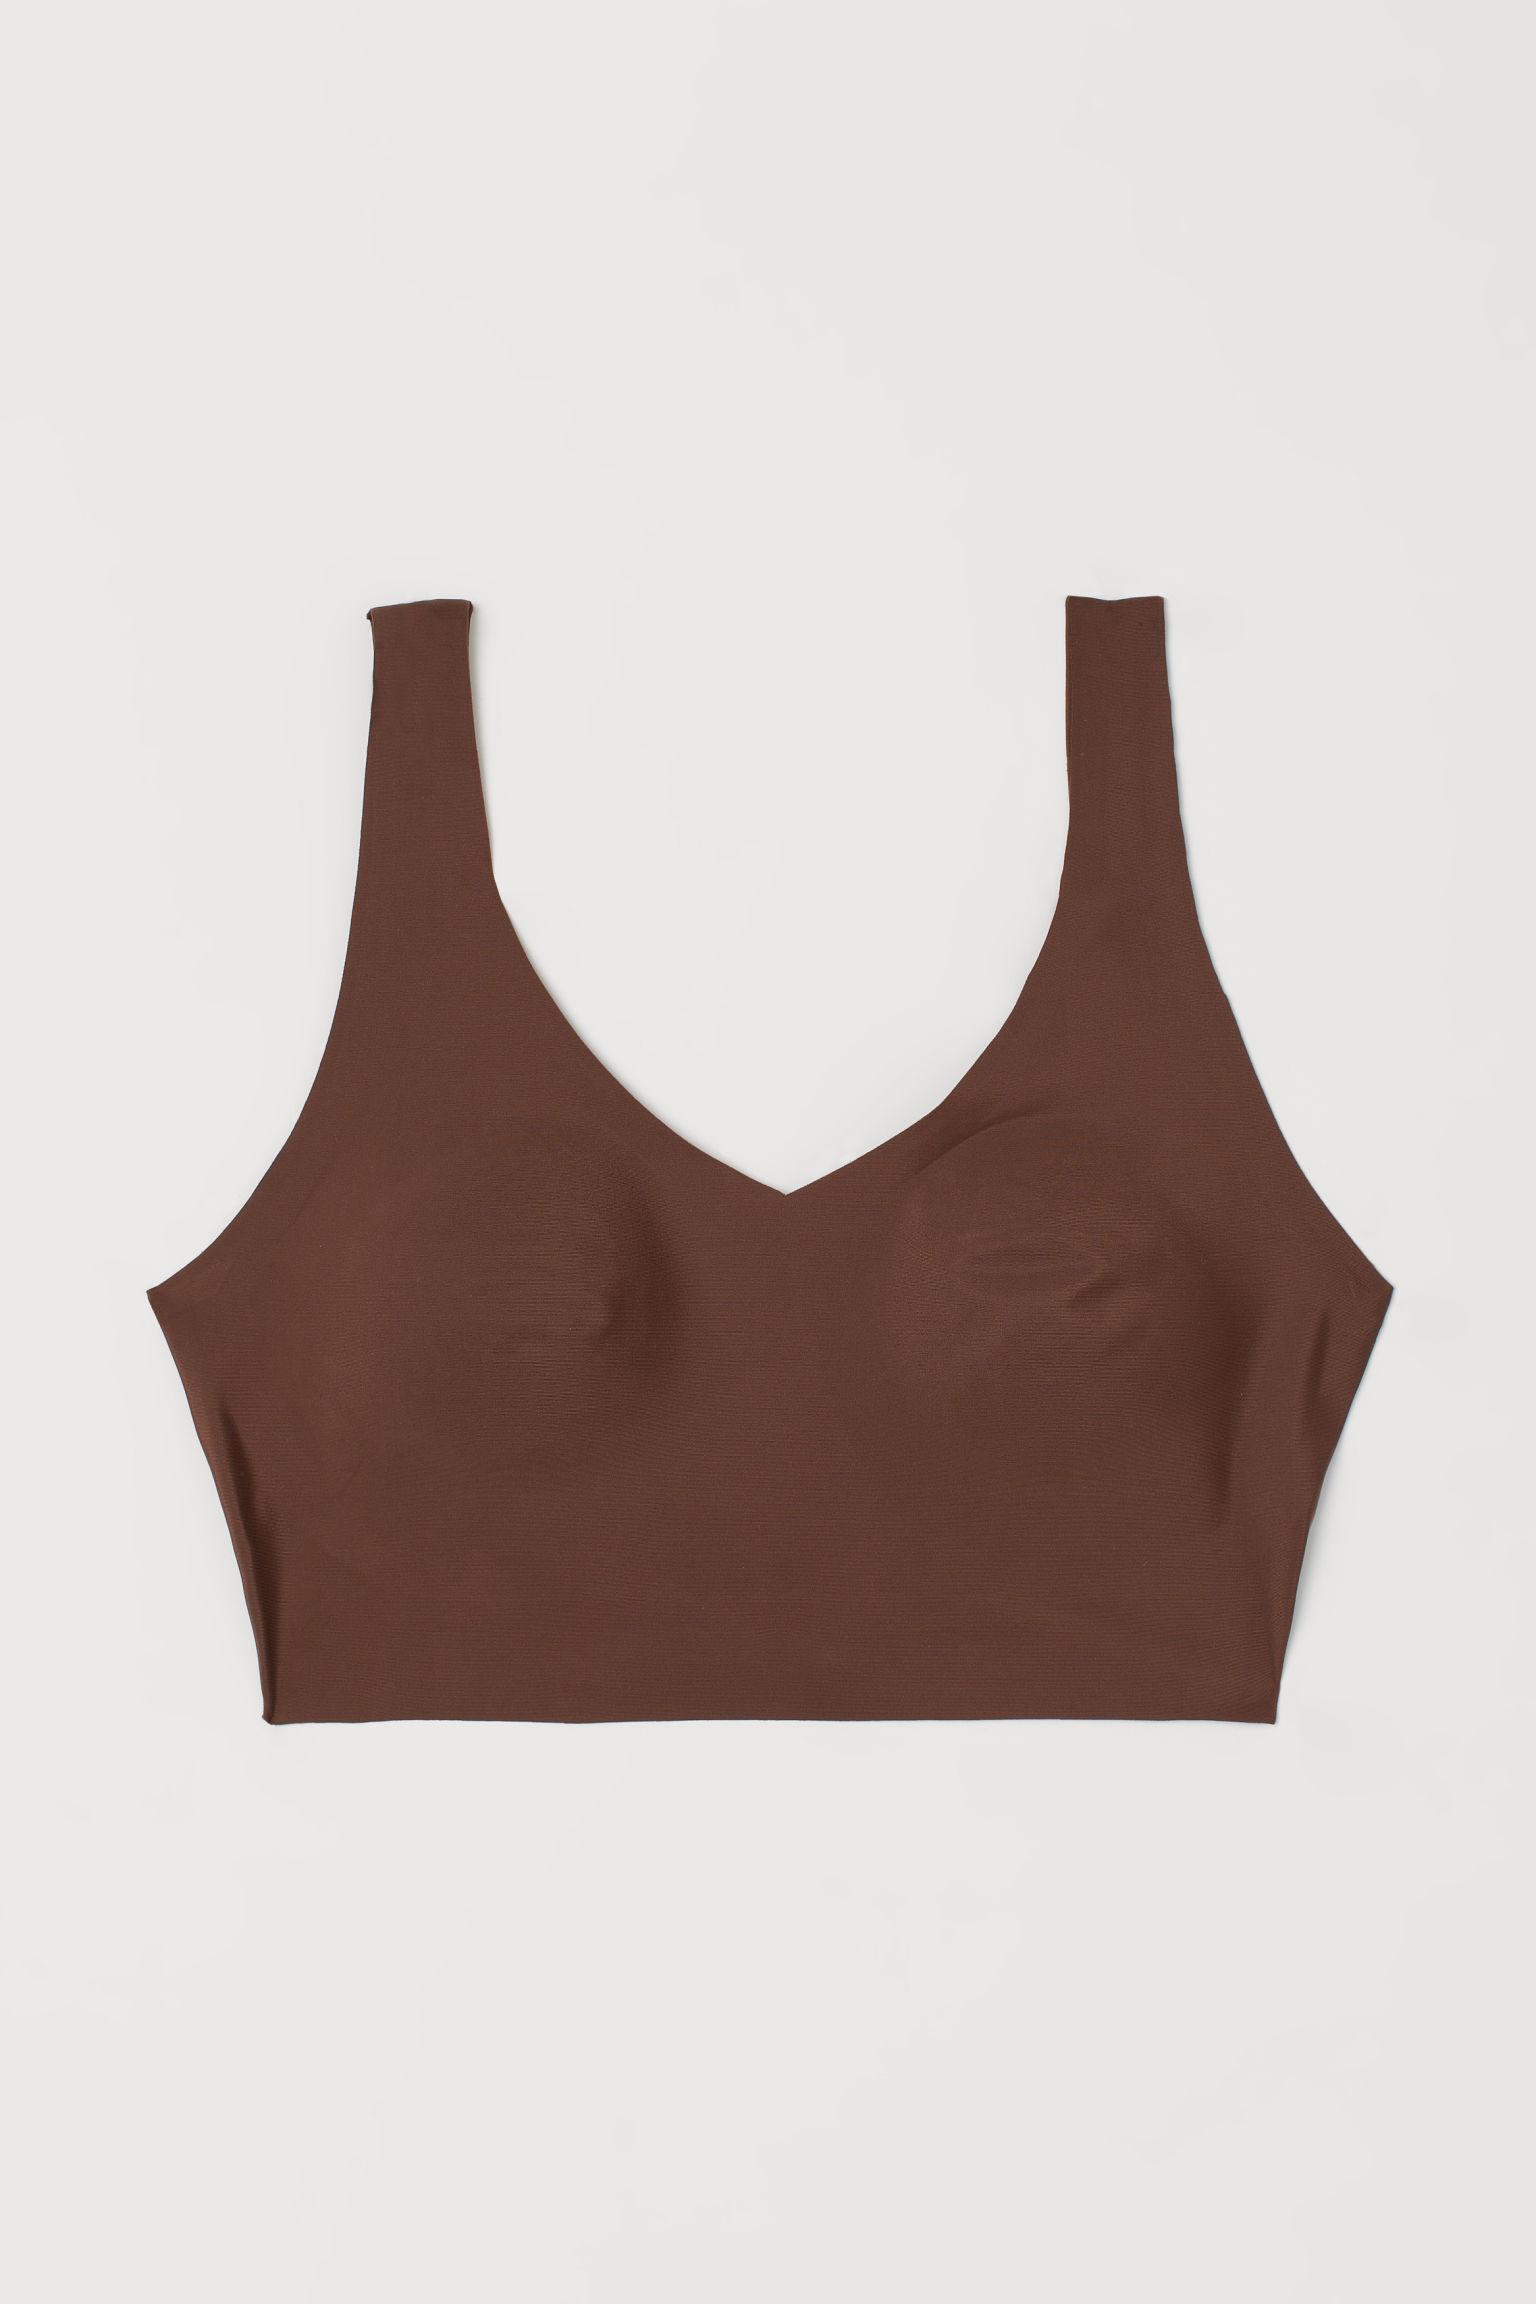 H&M Smoothing Microfibre Bra Top in Beige (Natural) - Lyst